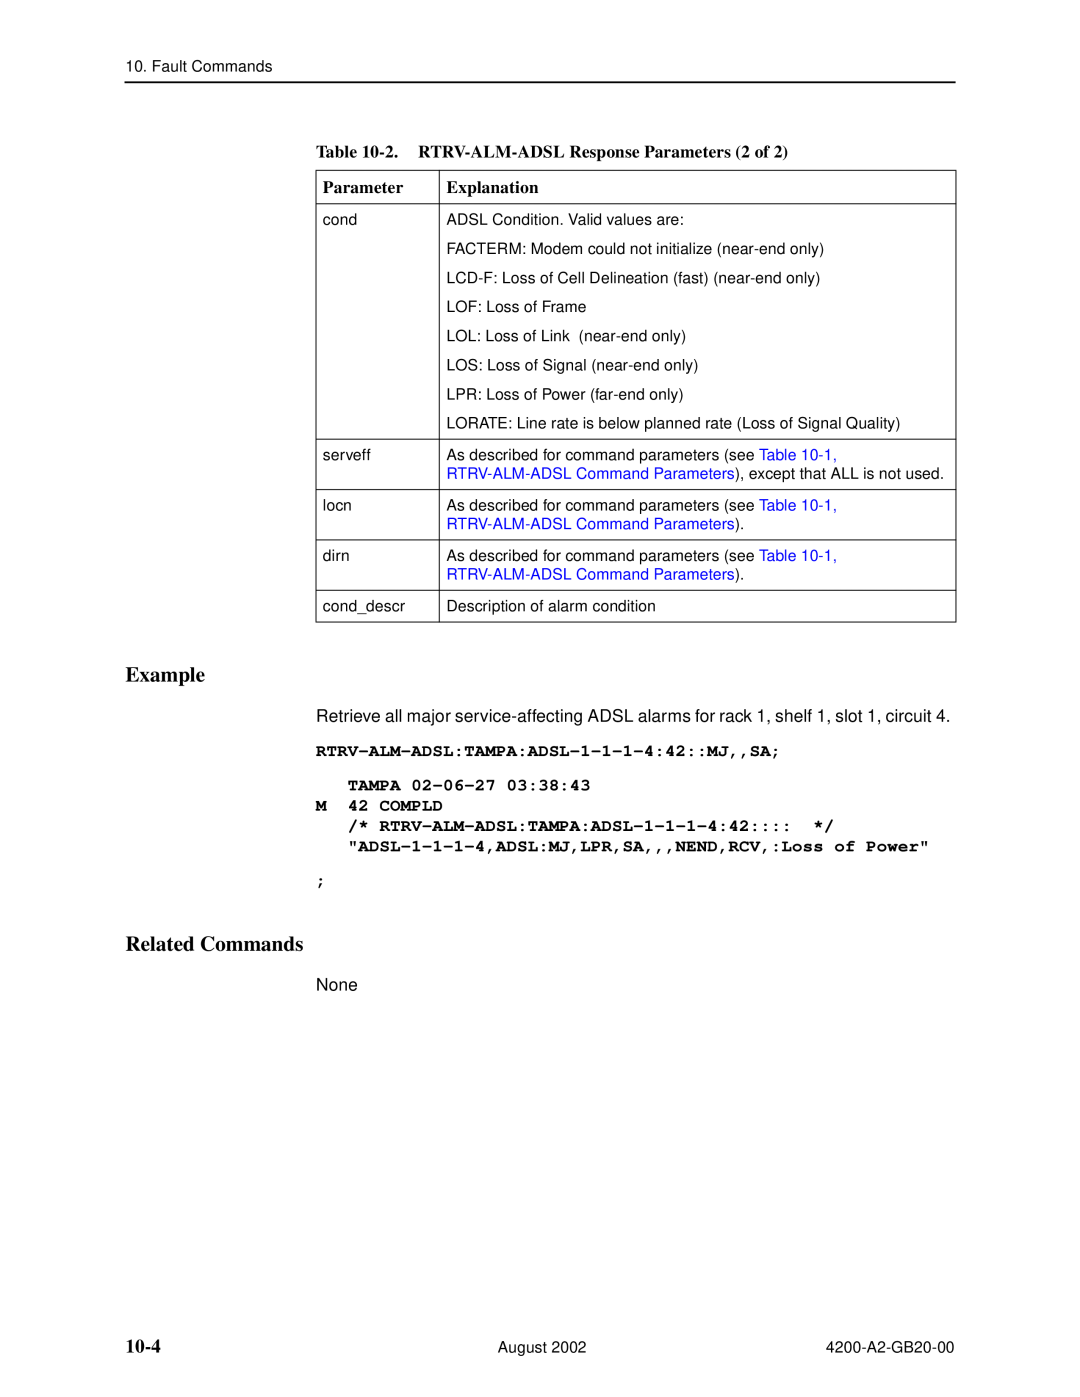 Paradyne 4200 manual 10-4, 2. RTRV-ALM-ADSL Response Parameters 2 of, Example, Related Commands, Explanation 